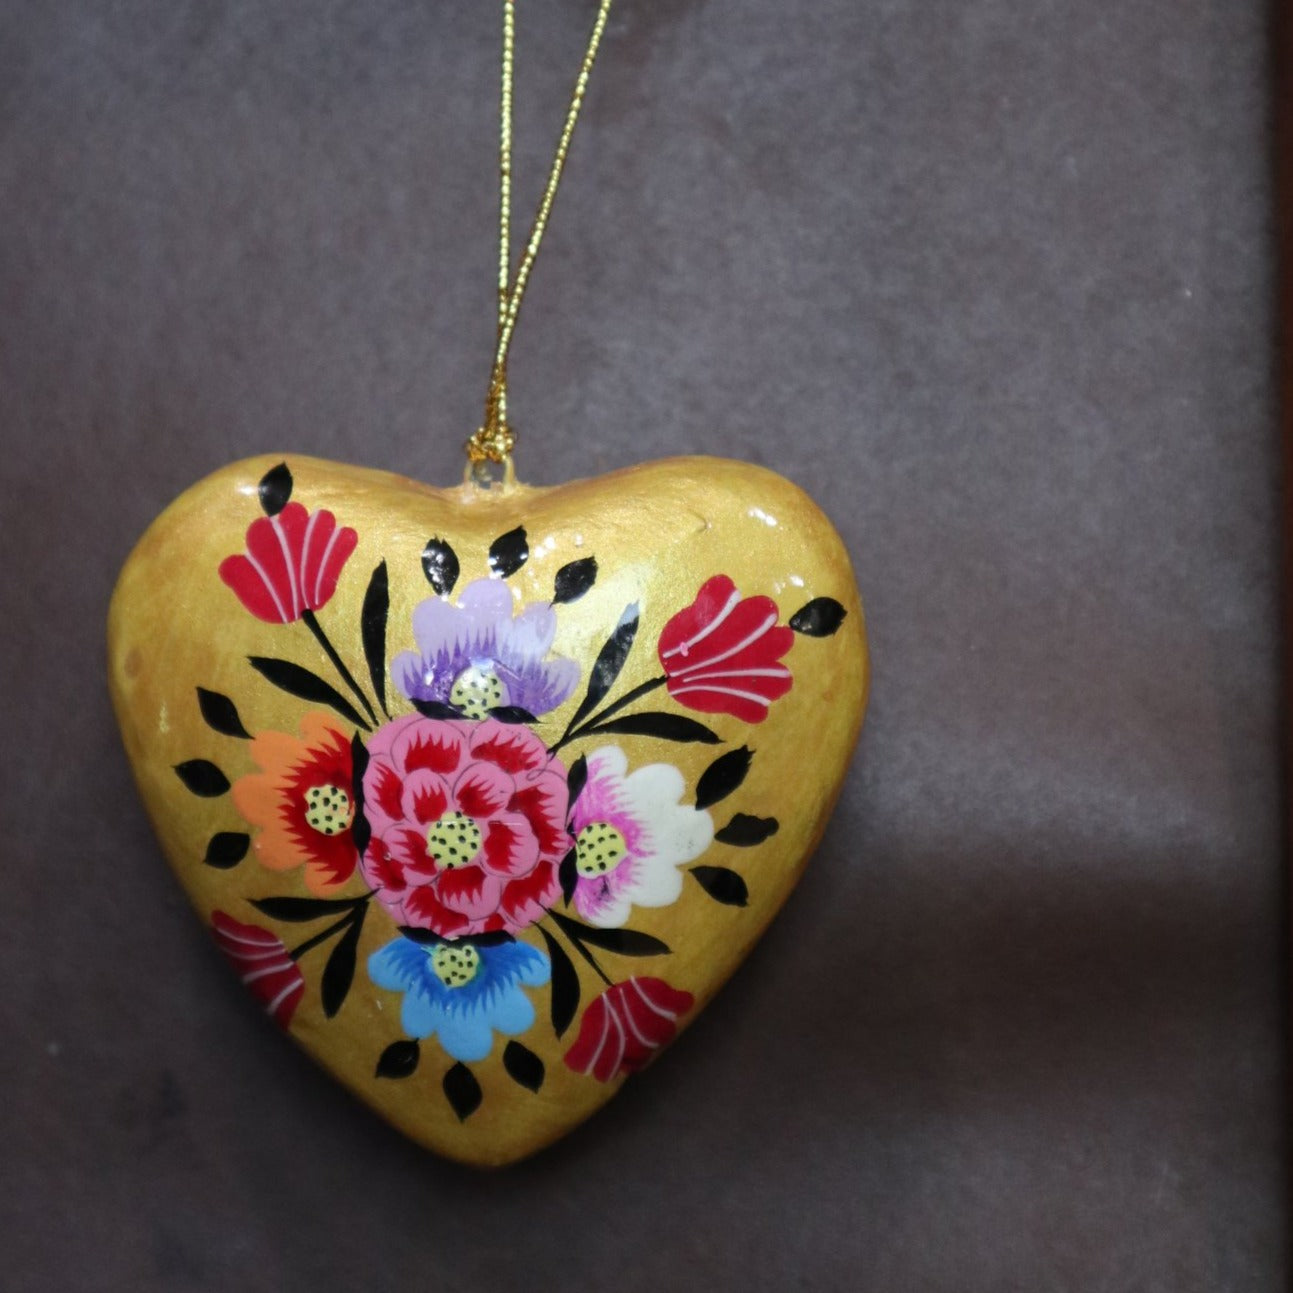 Fair Trade Ethical Christmas Decoration Hanging Heart Gold Flower